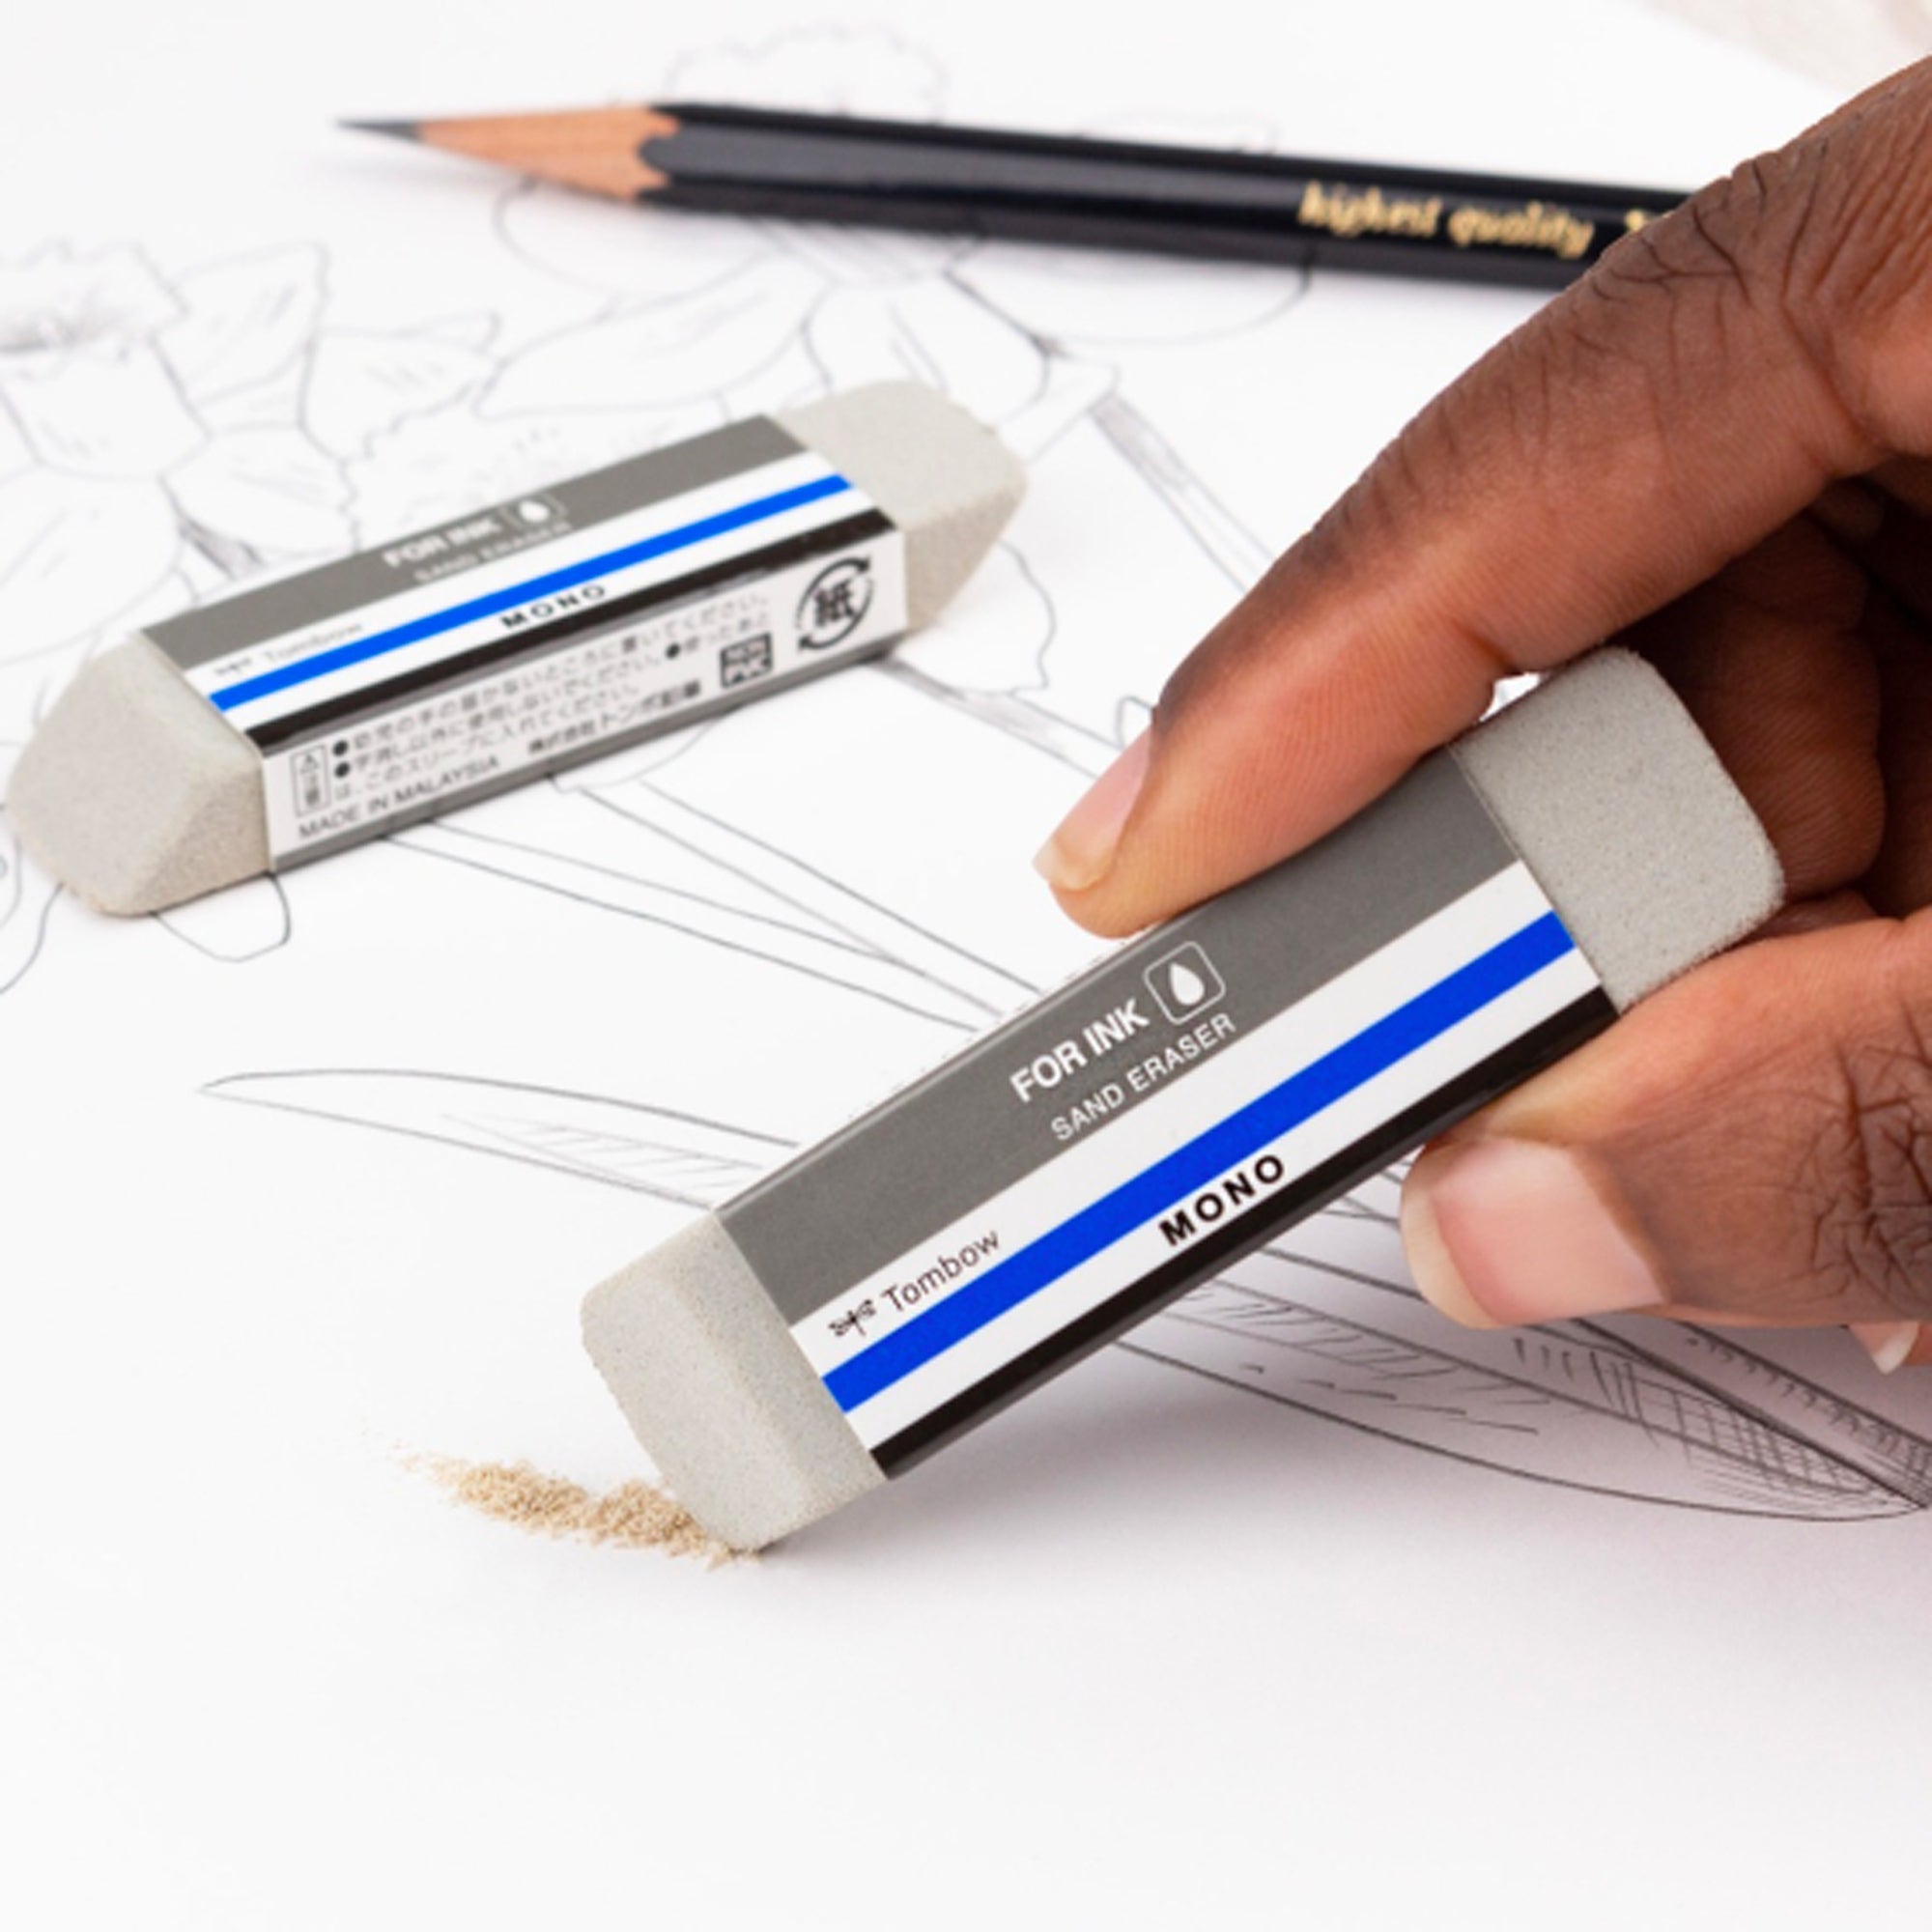 Mono Sand Eraser by Tombow 